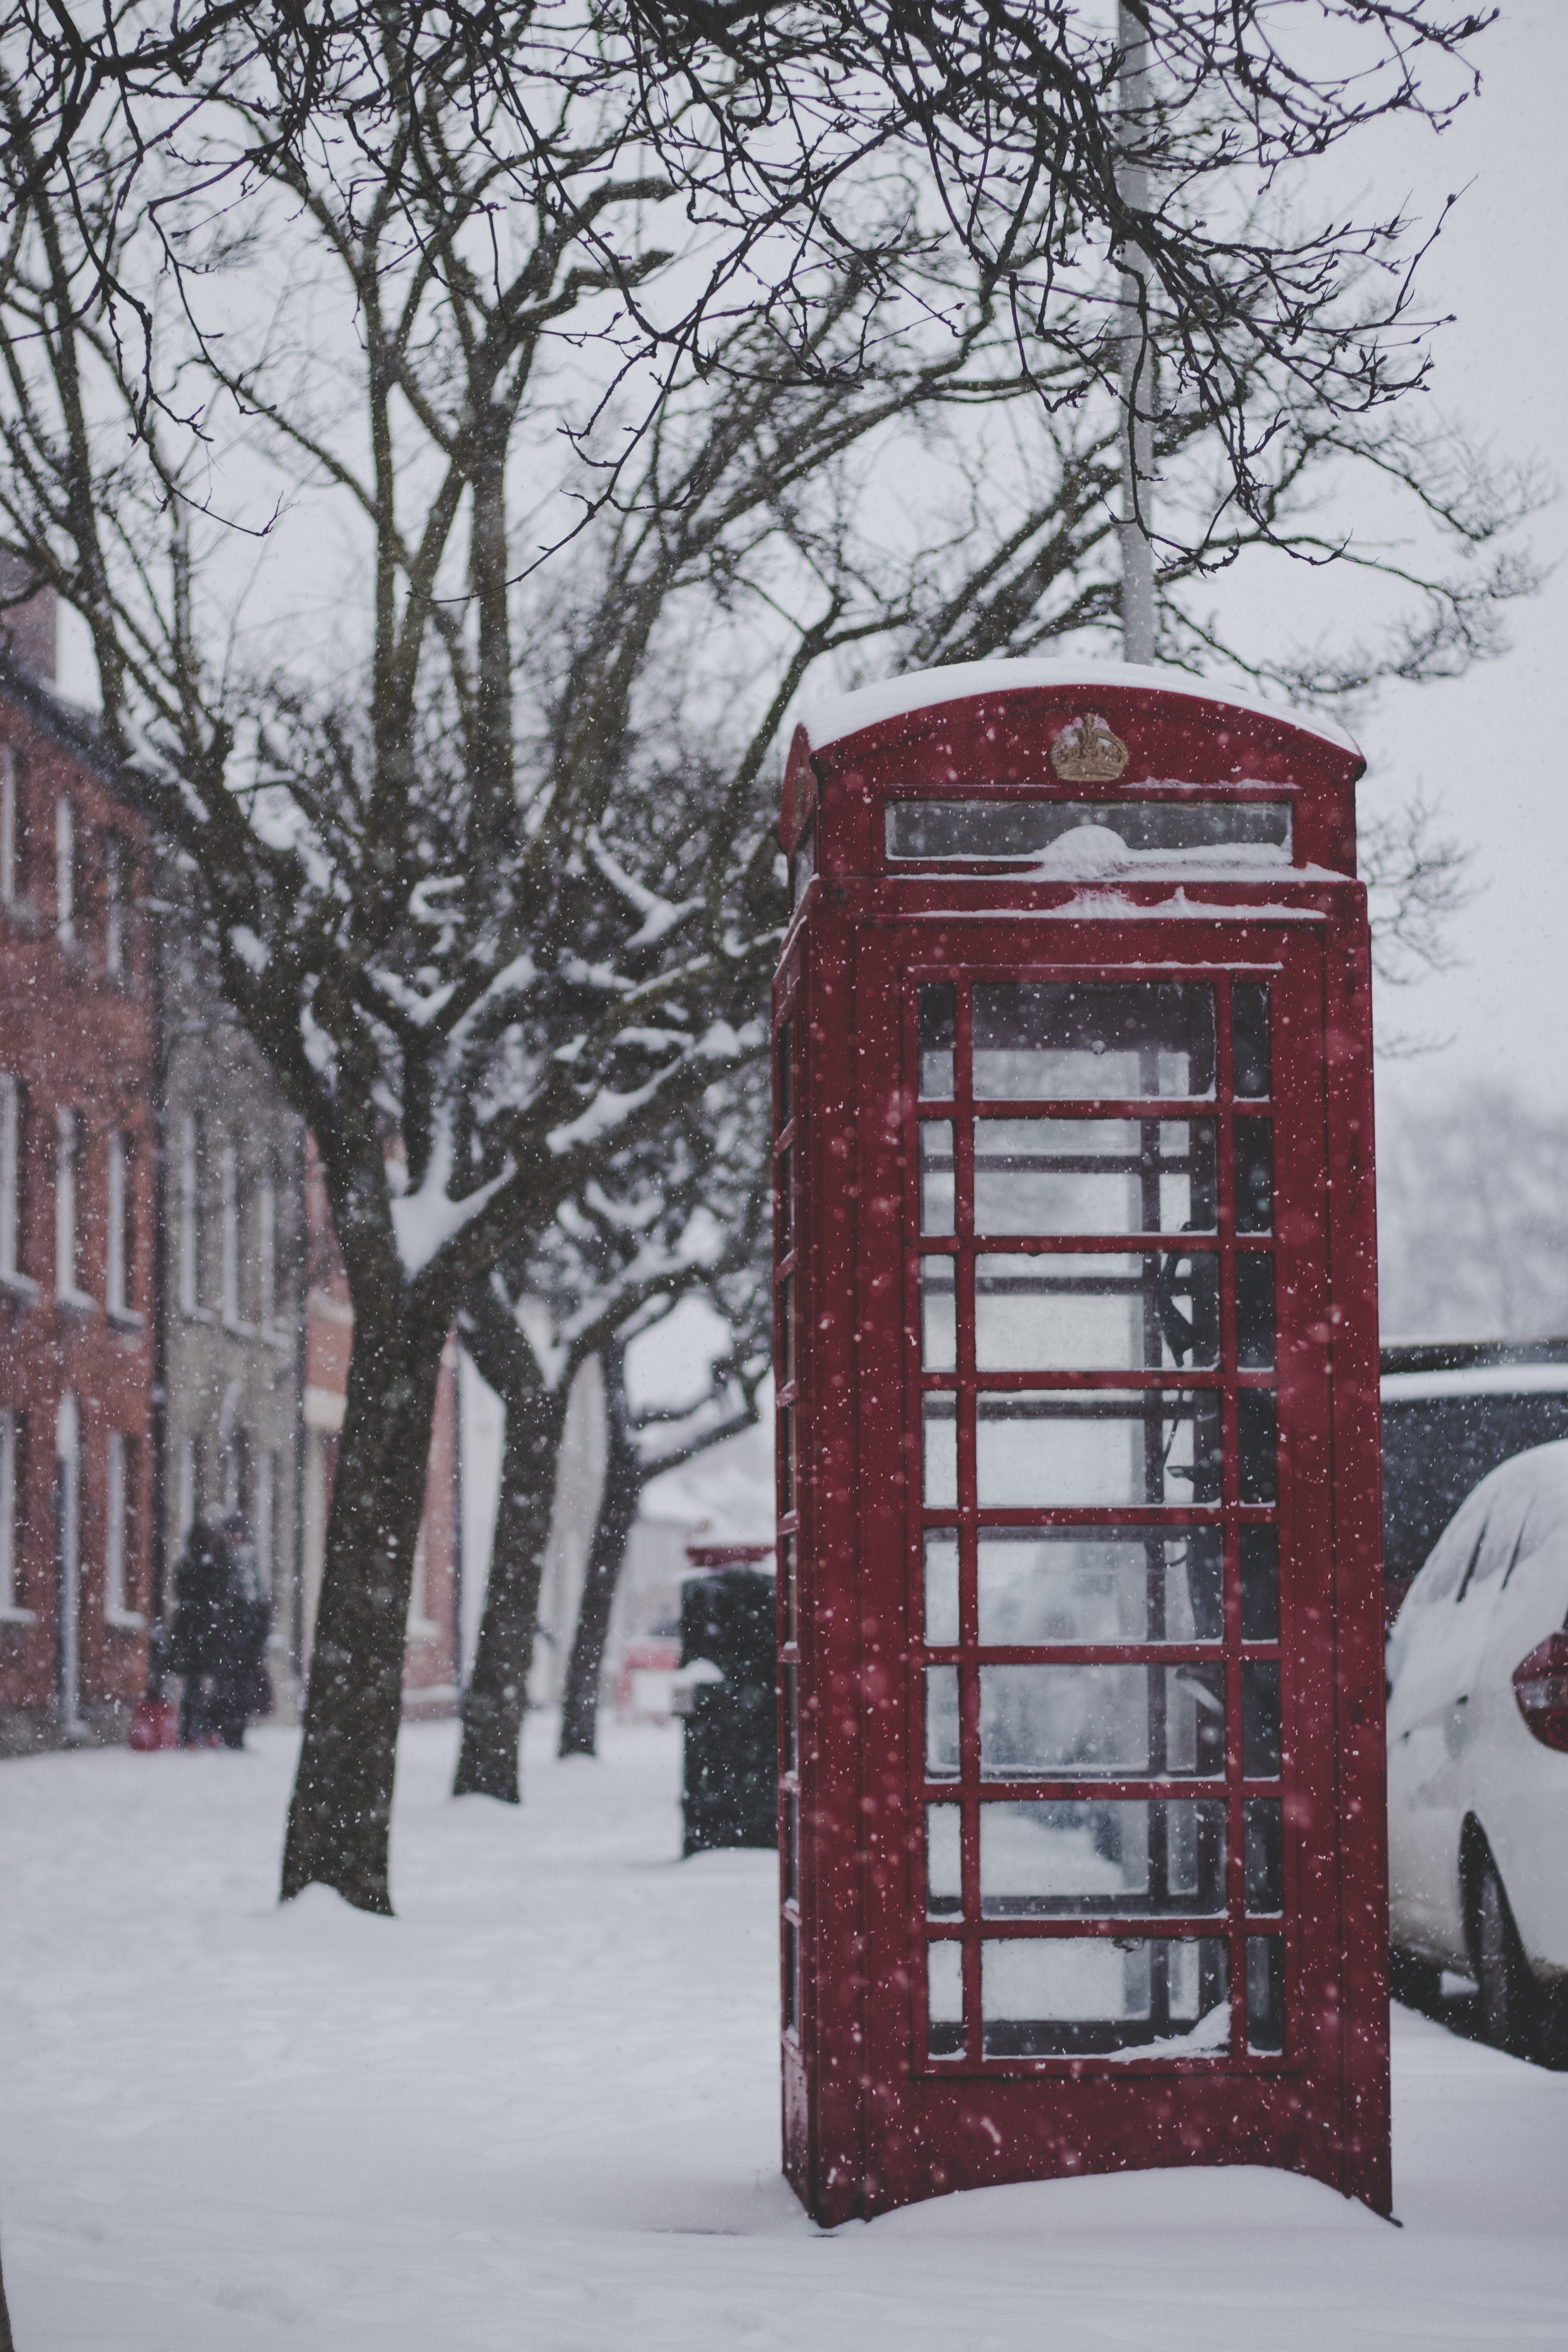 Red telephone booth on the sidewalk with snow photo